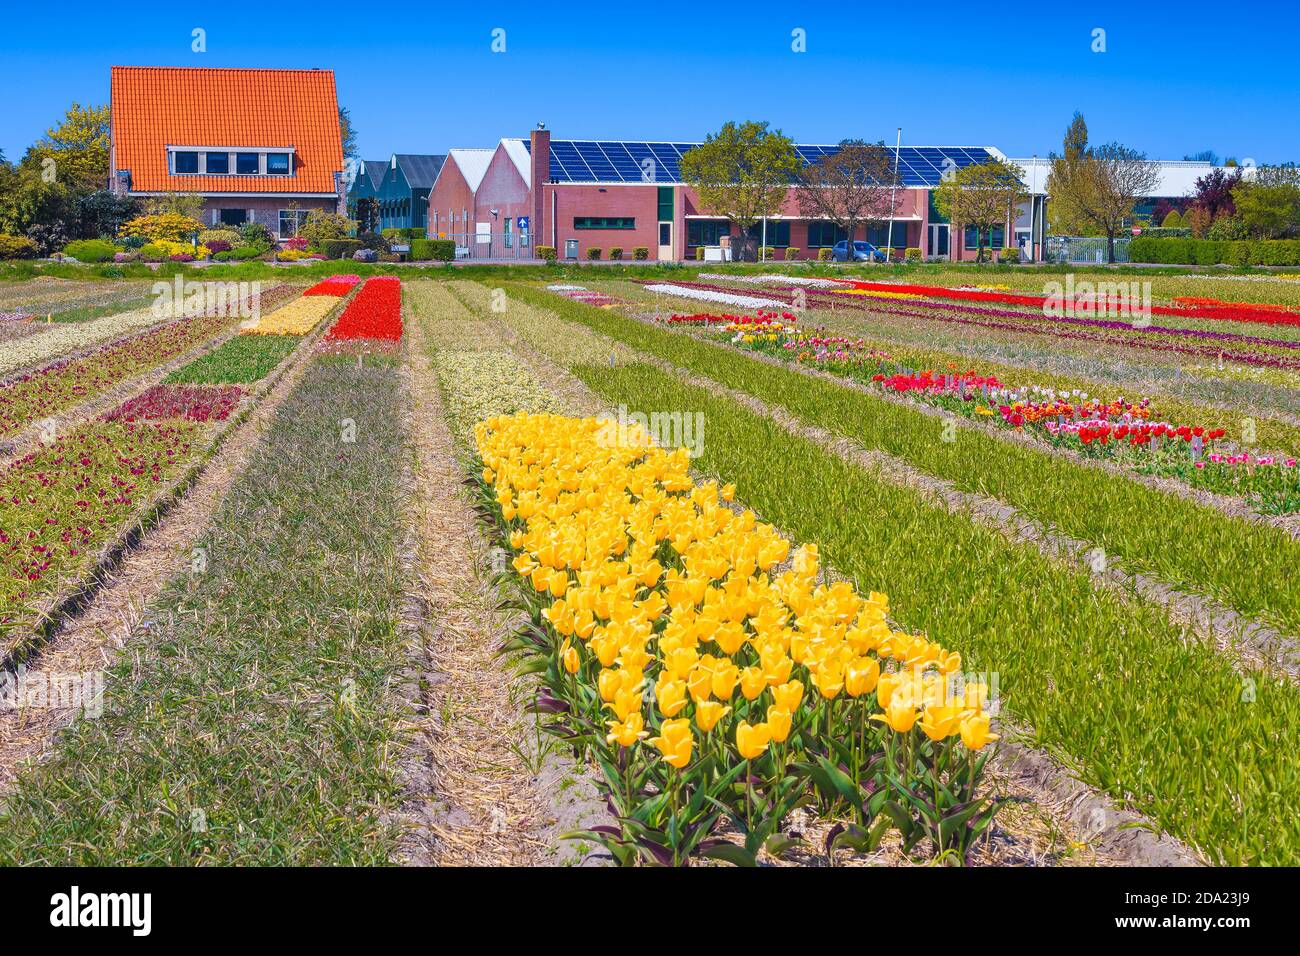 Warehouse and agricultural flowery fields. Flower garden decorated with various colorful tulips in Netherlands, Europe Stock Photo